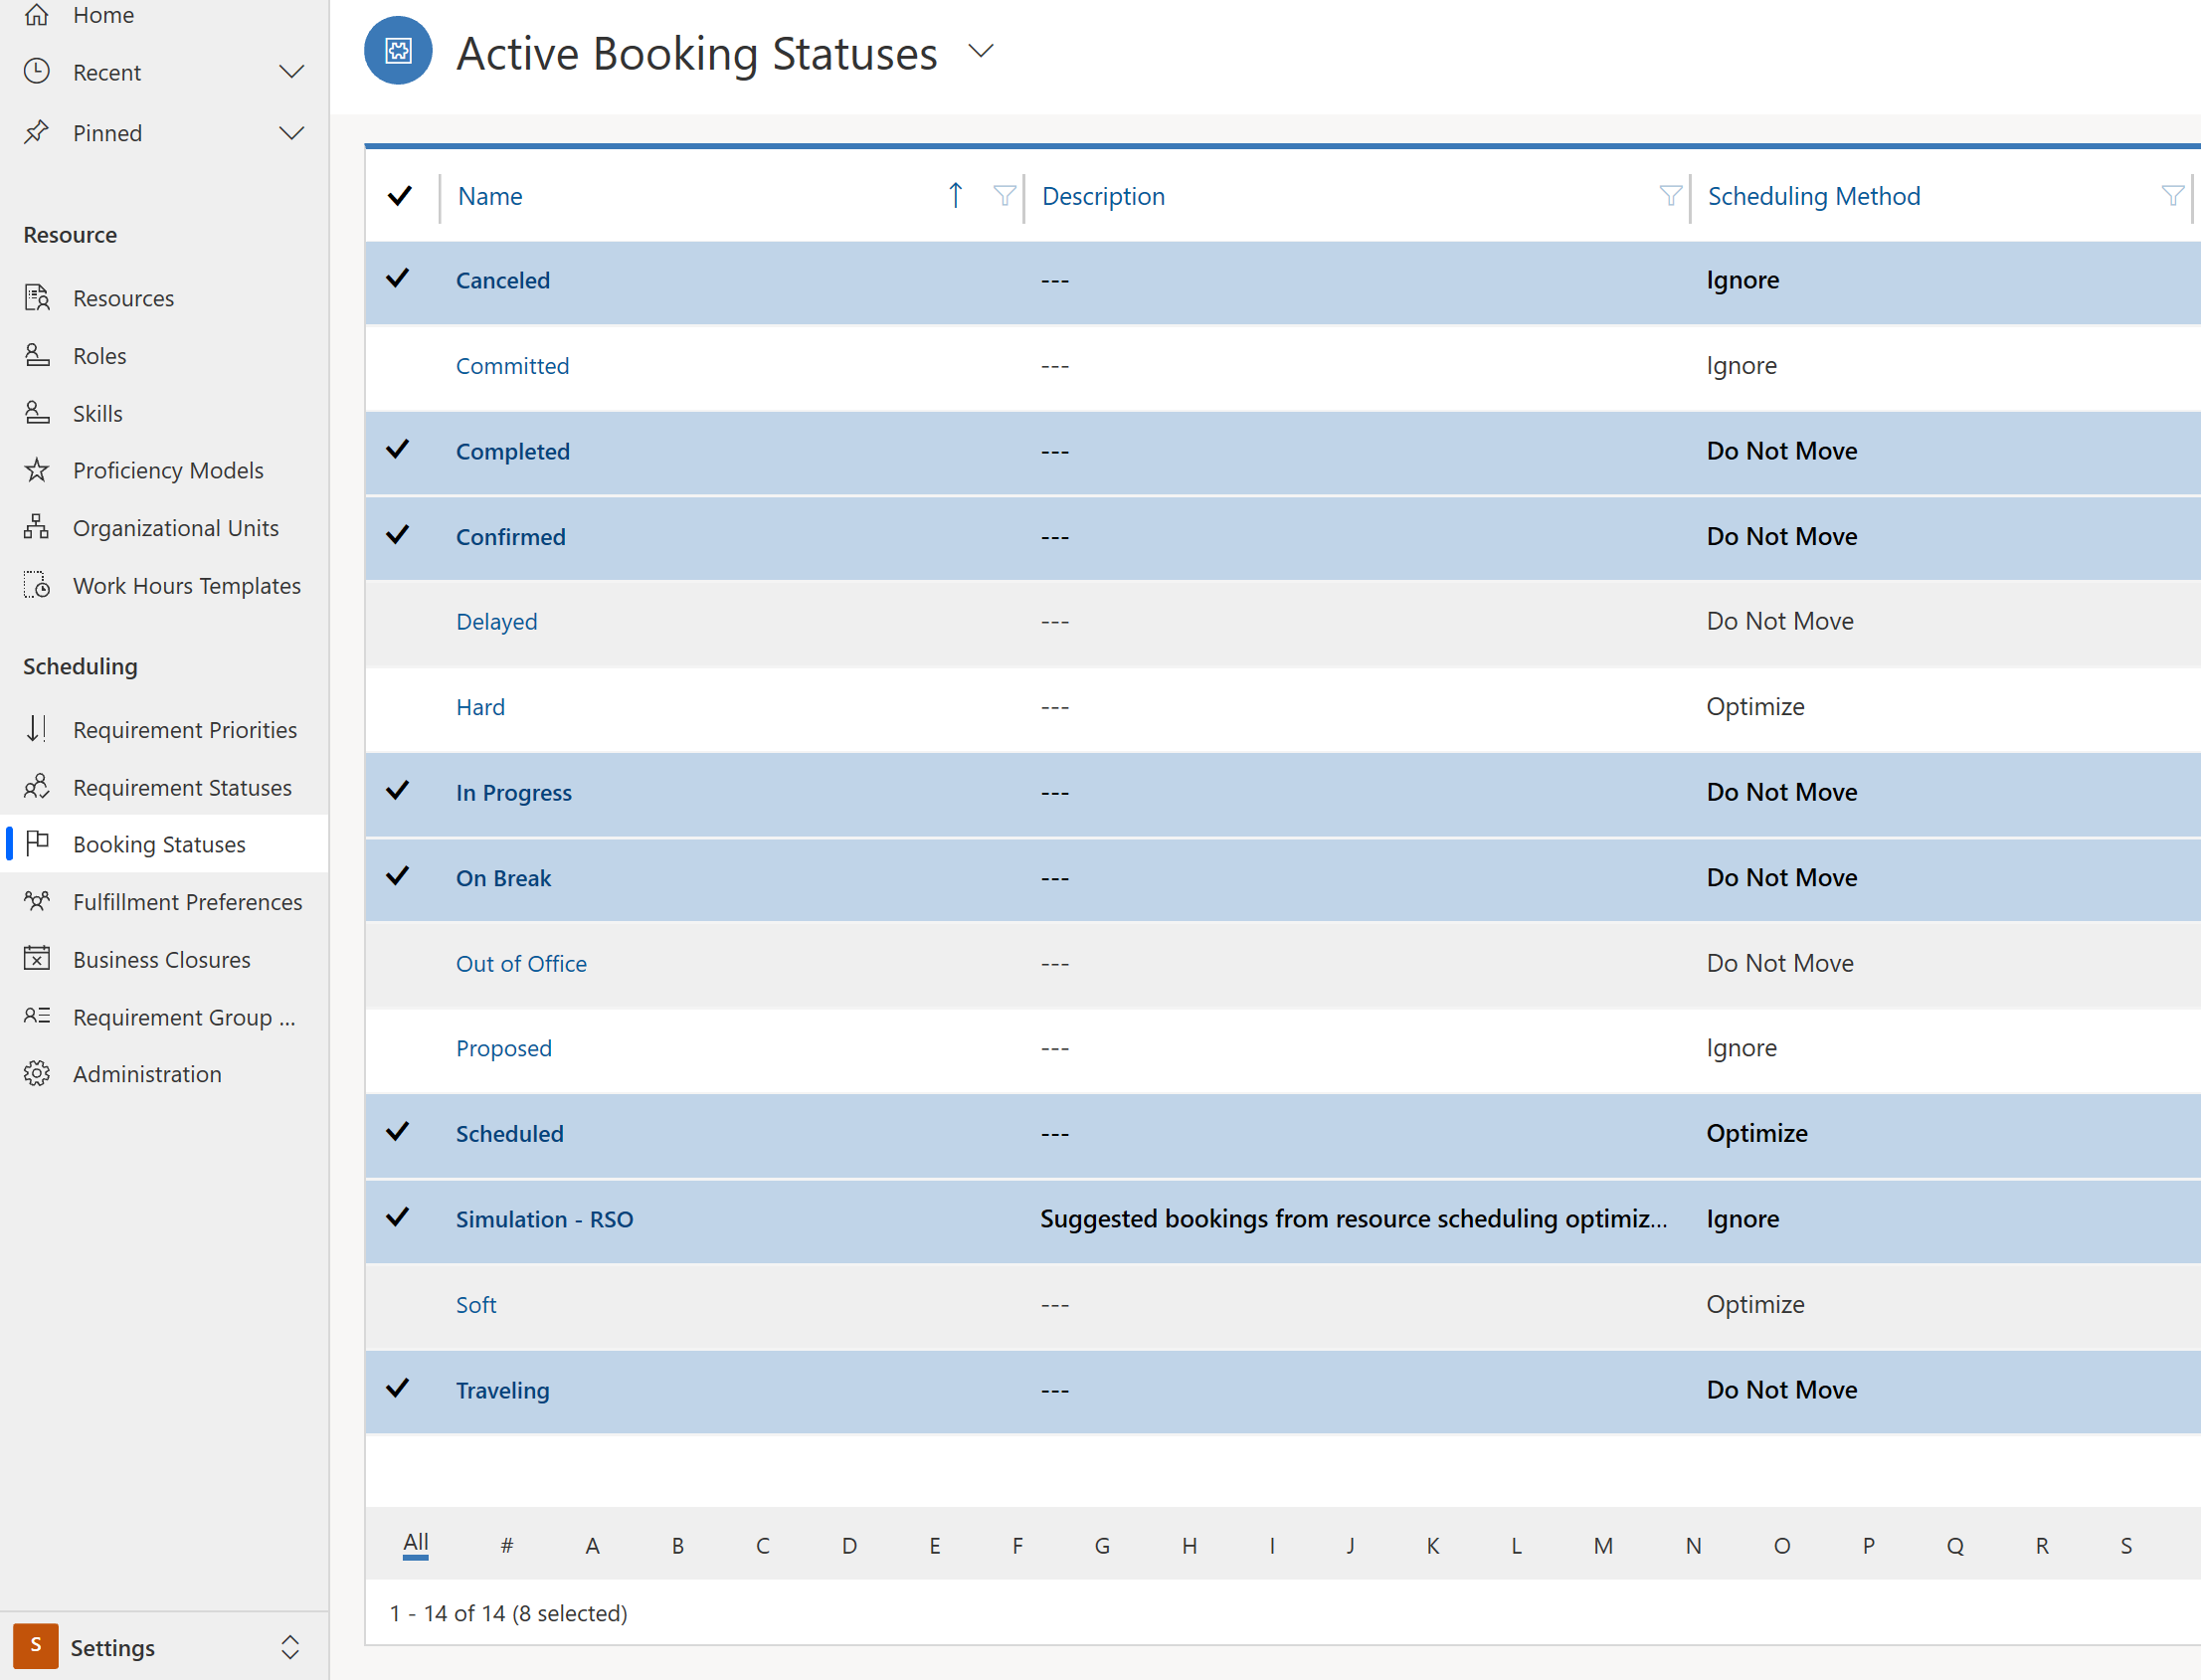 Screenshot of a list of active booking statuses.